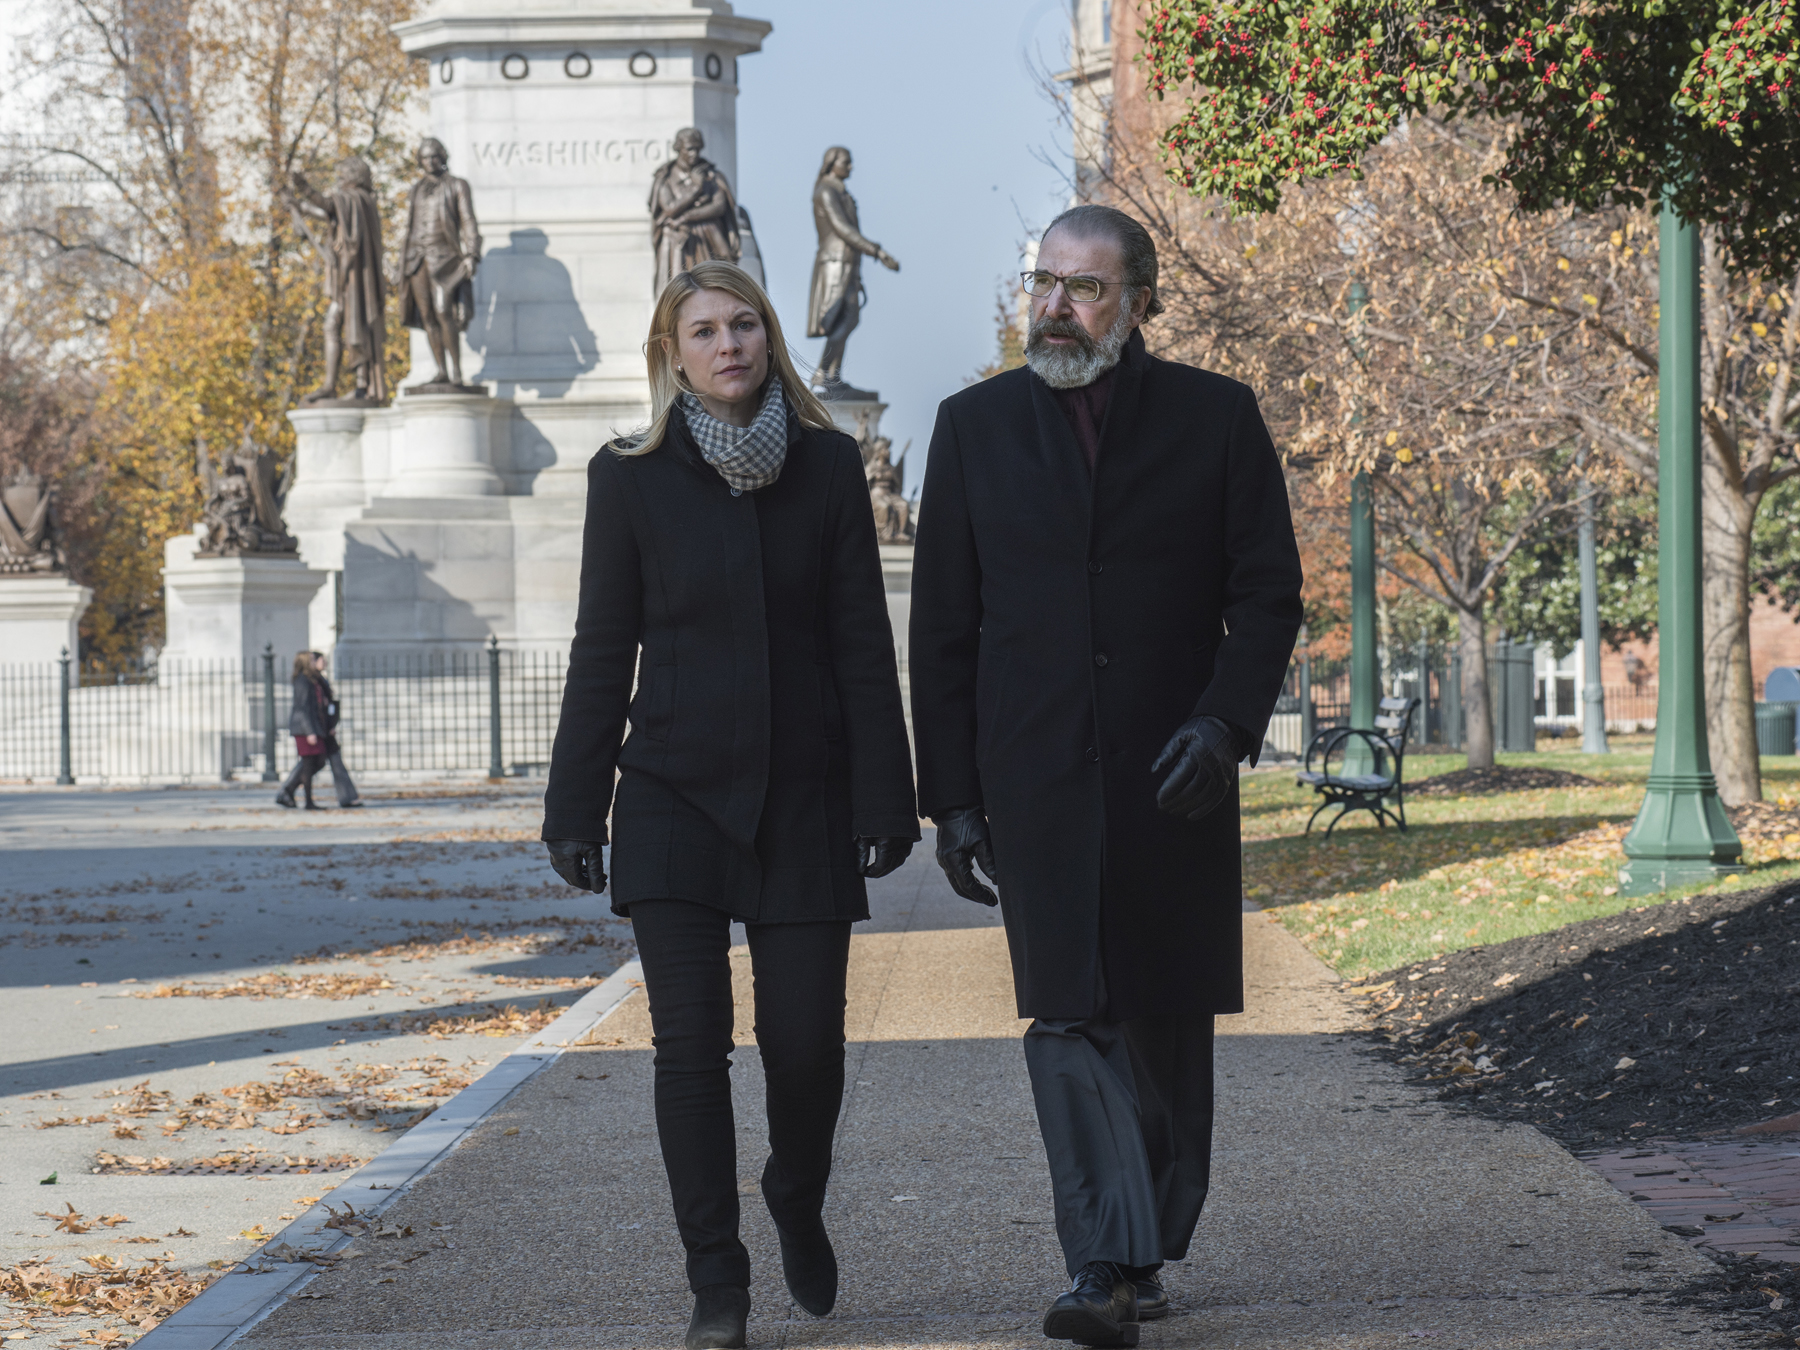 Claire Danes as Carrie Mathison and Mandy Patinkin as Saul Berenson in HOMELAND (Season 7, Episode 06). - Photo: Antony Platt/SHOWTIME